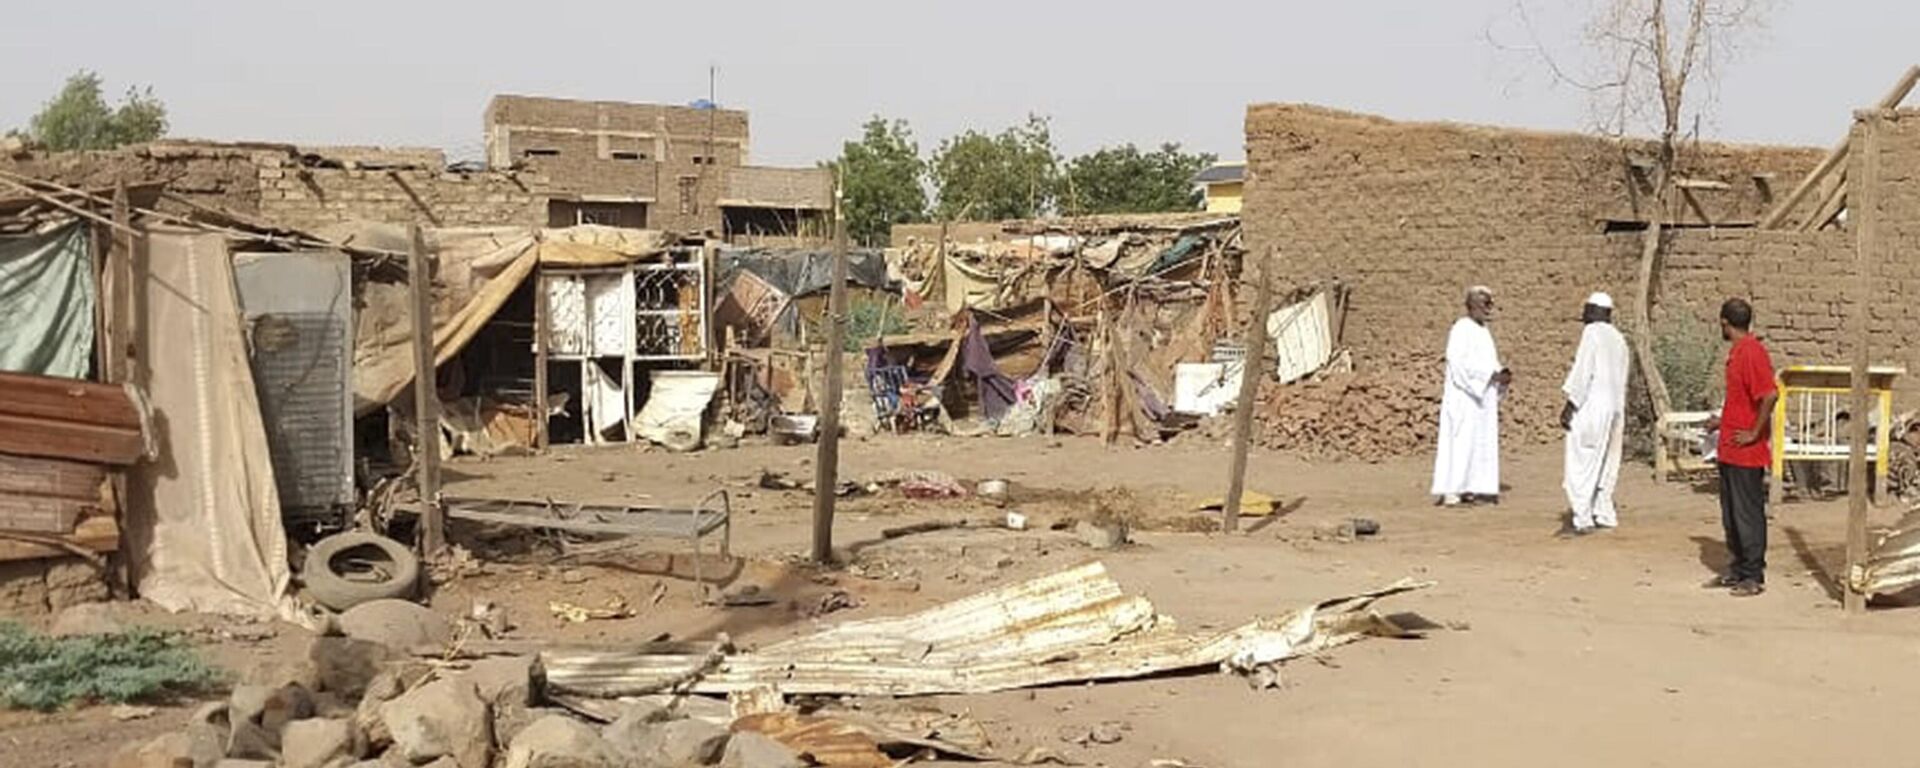 People check the rubble of their destroyed home after strikes at Allamat district in Khartoum, Sudan, Thursday, June 1, 2023. The White House says it's imposing sanctions against key defense companies and people who “perpetuate violence” in Sudan as the warring sides fail to abide by a cease-fire agreement in the northeastern African nation.  - Sputnik Africa, 1920, 20.06.2023